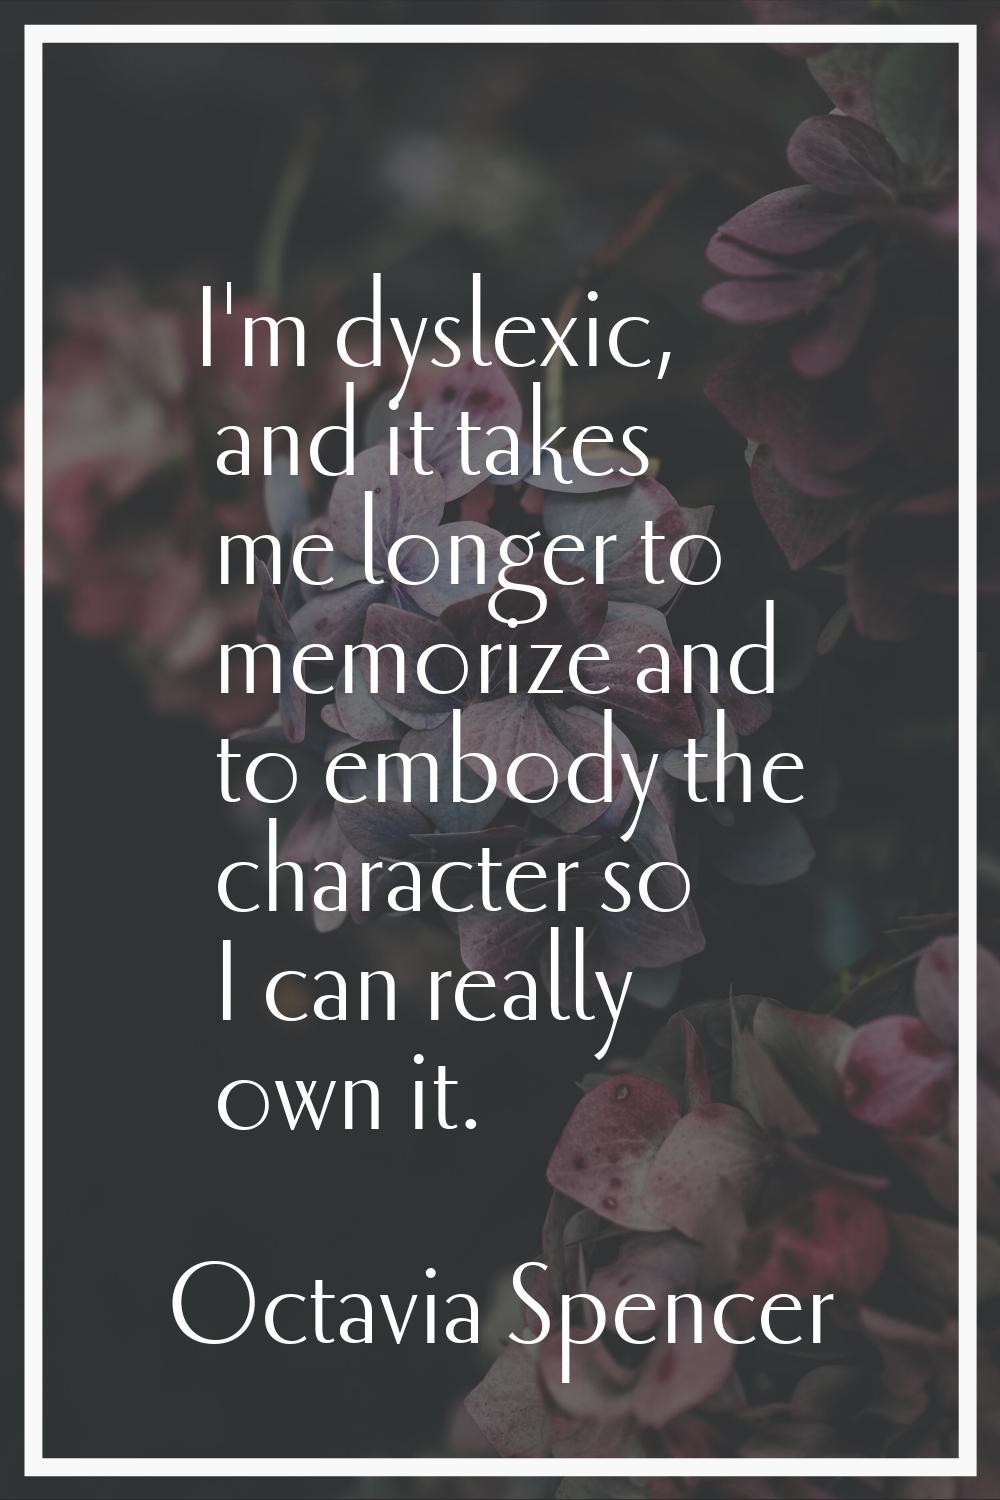 I'm dyslexic, and it takes me longer to memorize and to embody the character so I can really own it